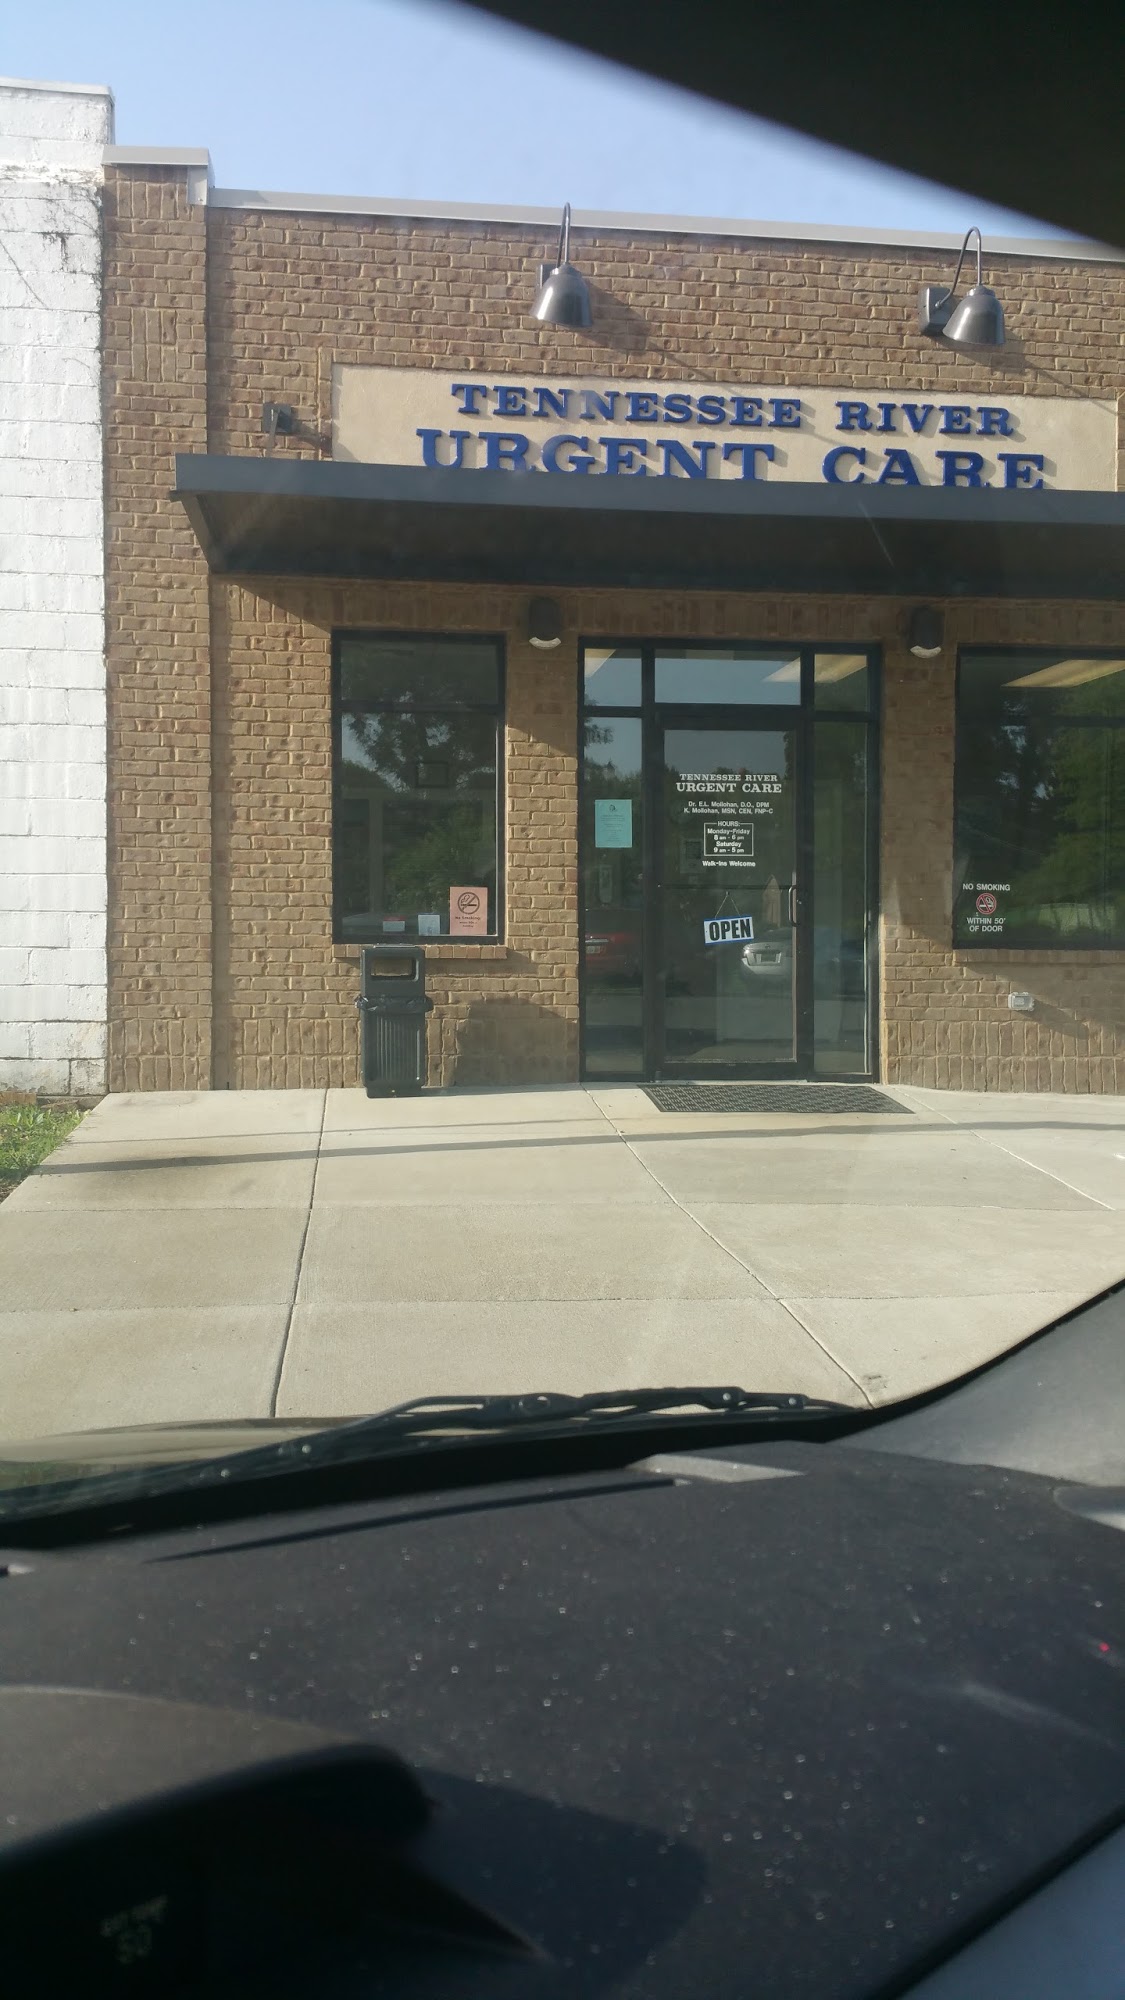 Tennessee River Urgent Care